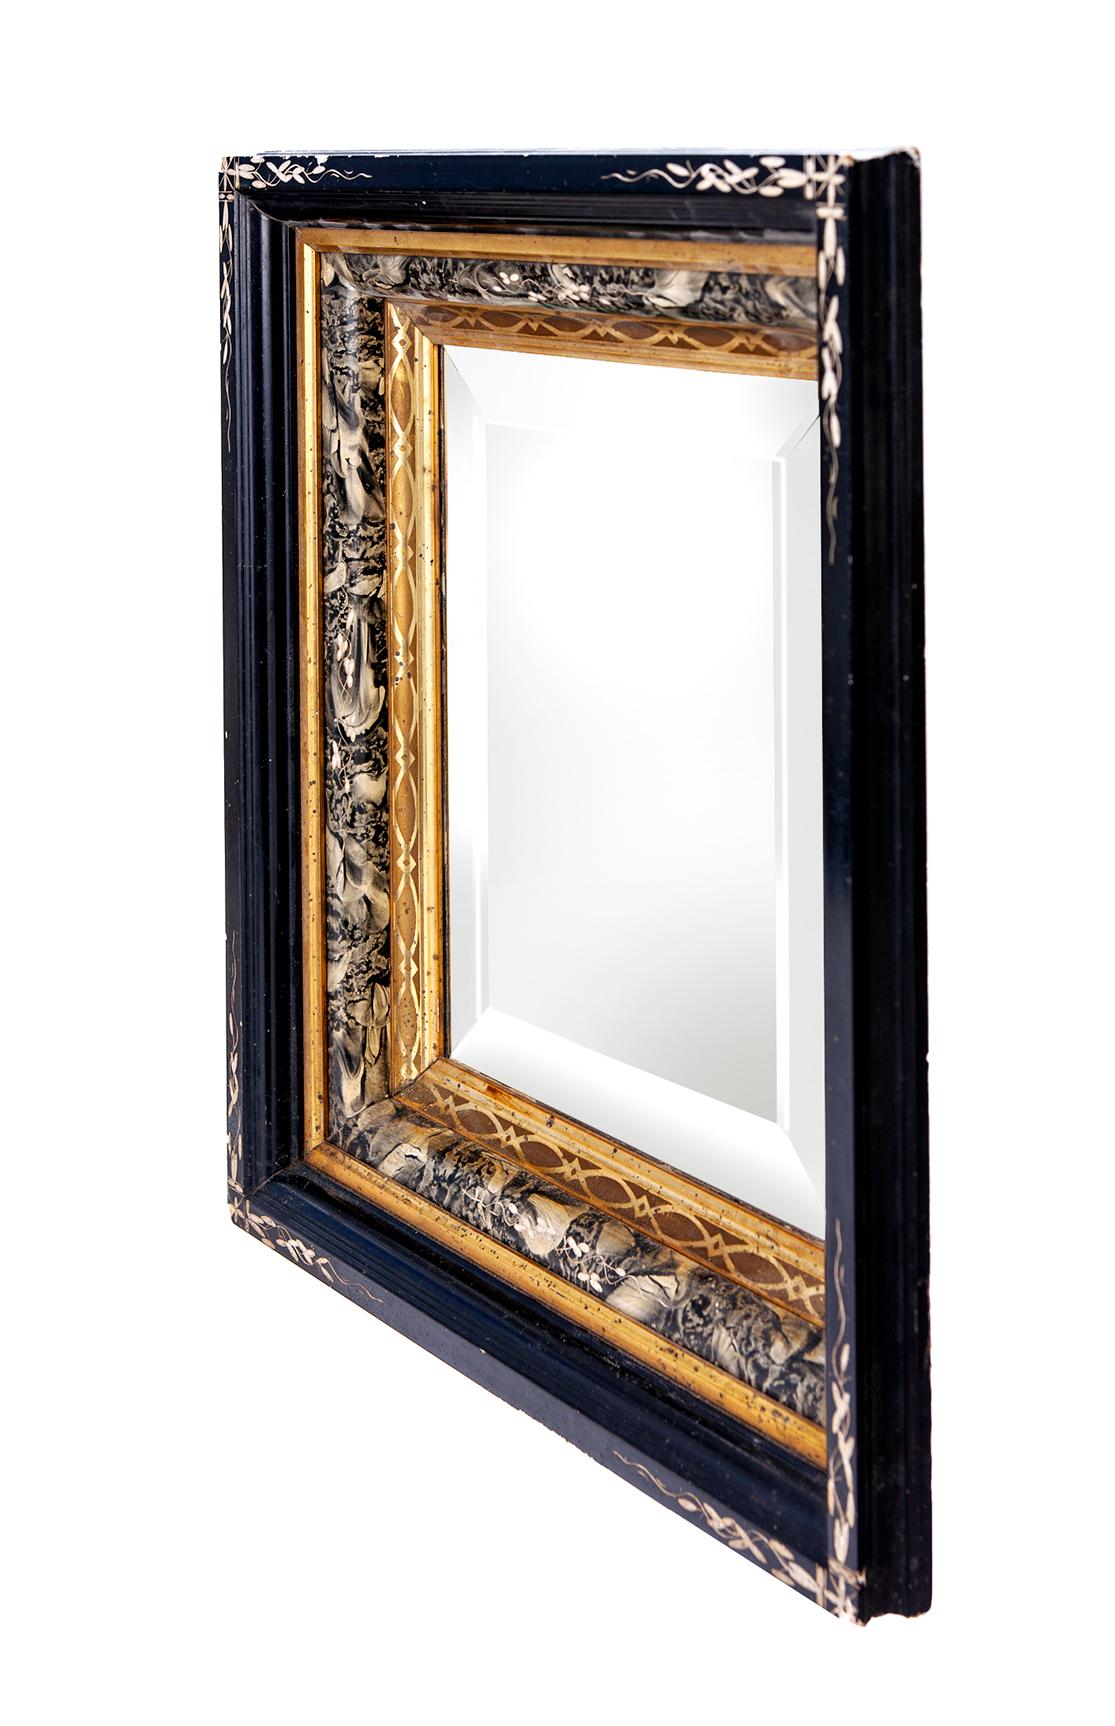 An antique 19th century Eastlake frame with decorative ebonized Incised border and gilt accents. Deep well frame with marblized inner frame.
The frame has a stunning “fossil” pattern surface with ebonized detailing and a lemon gilded stencil etched